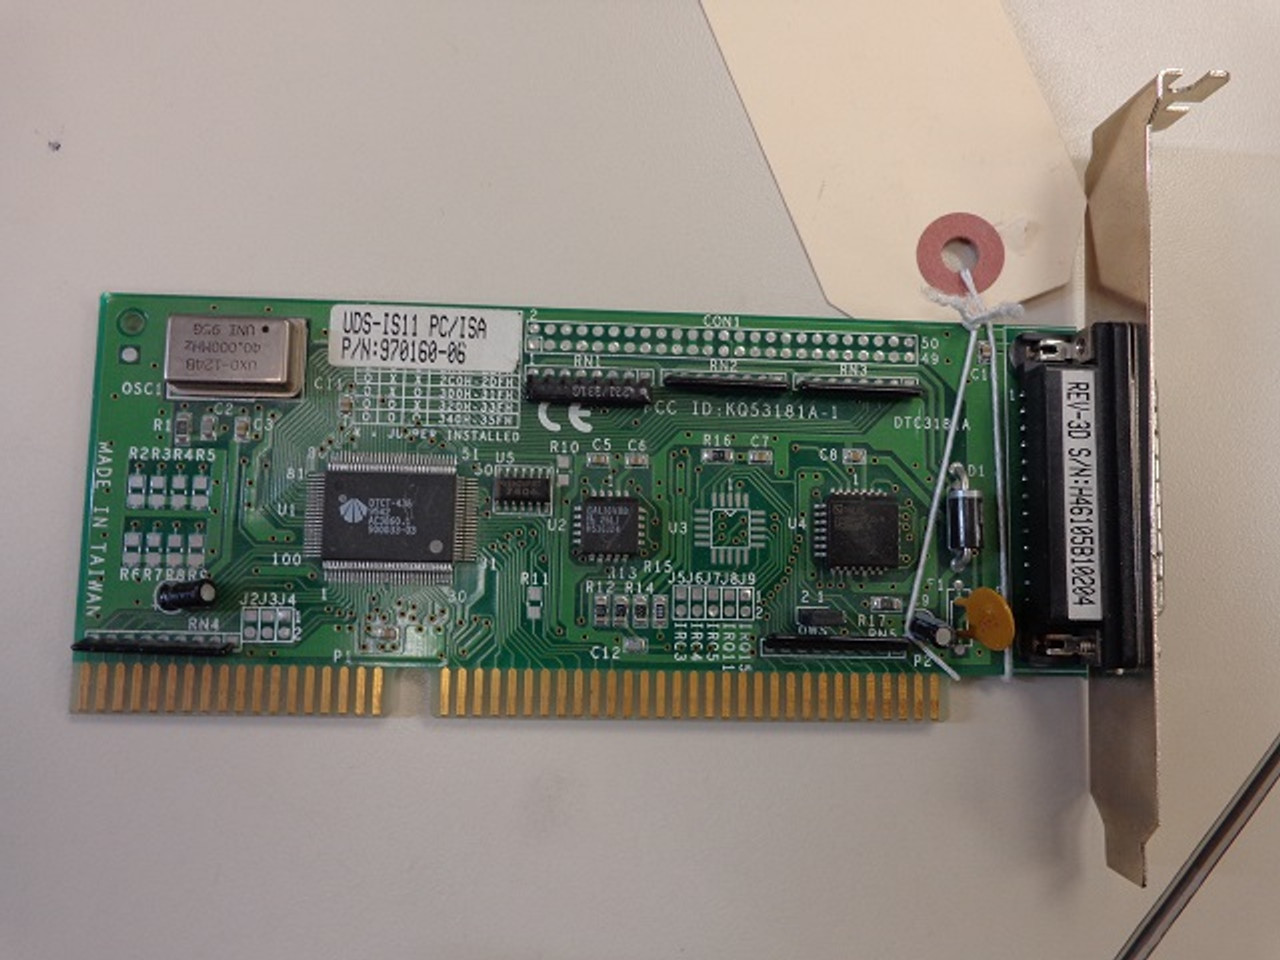 Domex 970160-06 ISA - SCSI Controller Card UDS-IS11